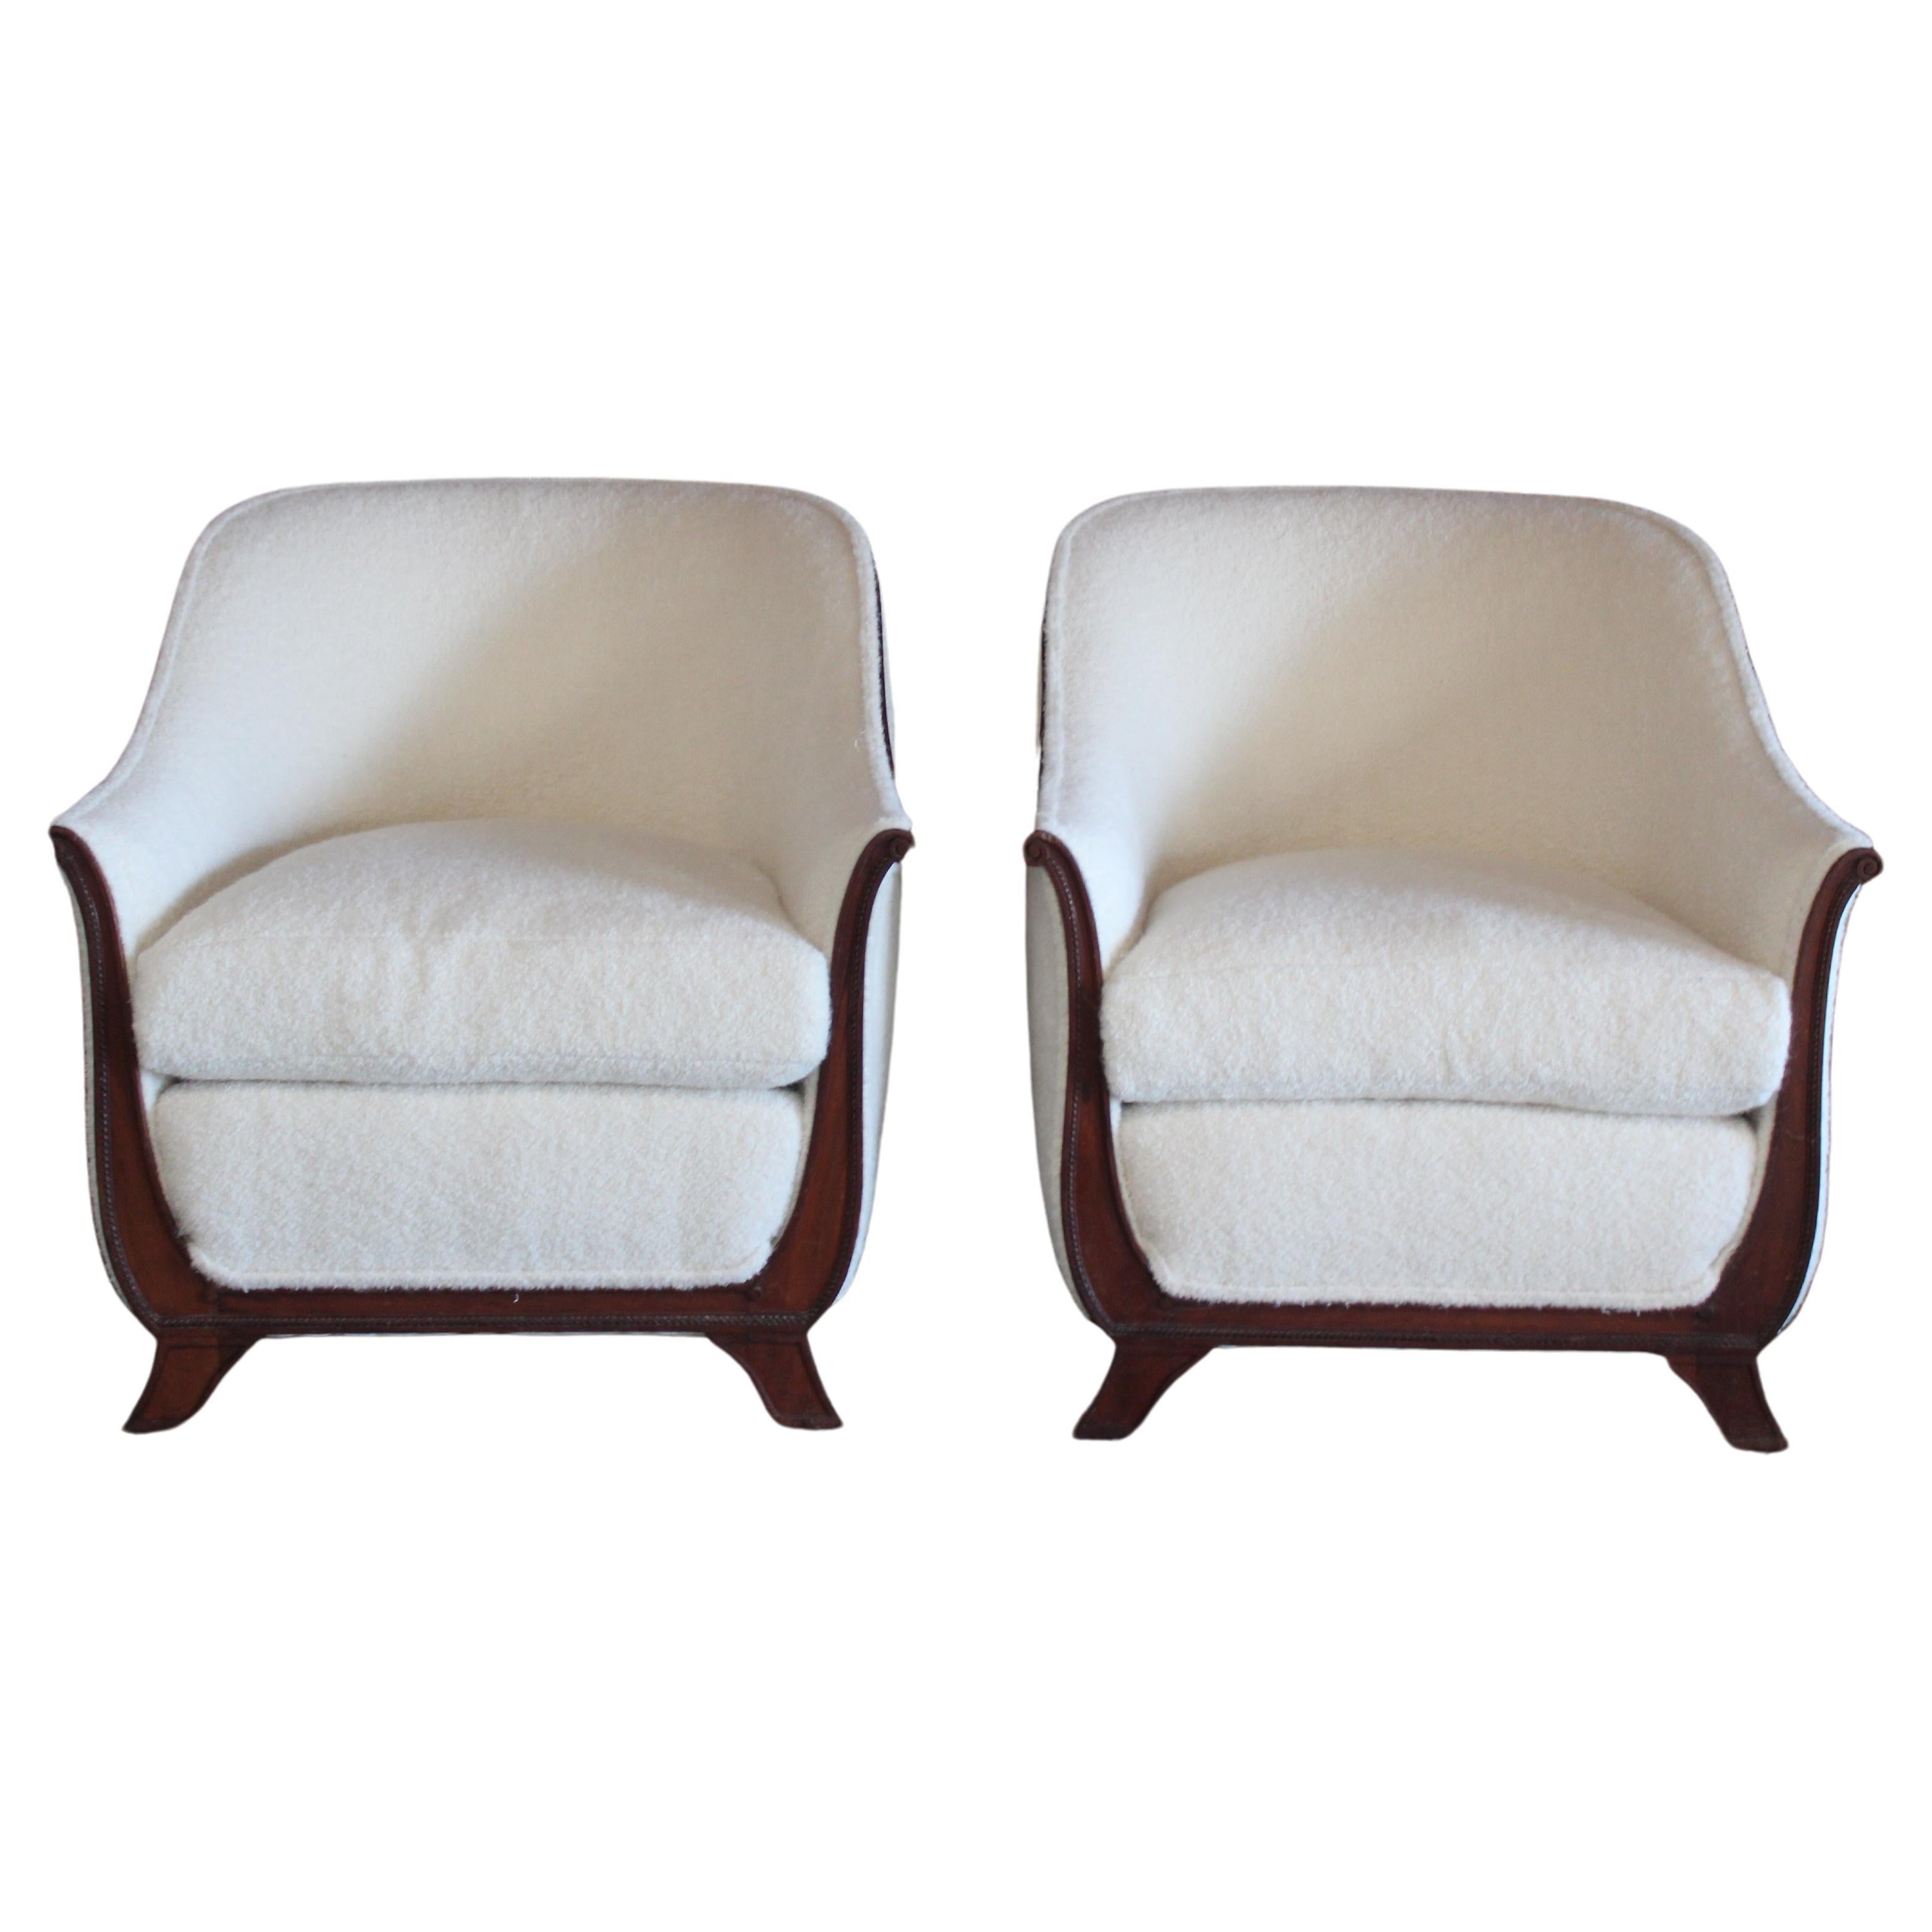 Pair of Lounge Chairs in Alpaca Wool, France, 1930s. Attributed to Jules Leleu